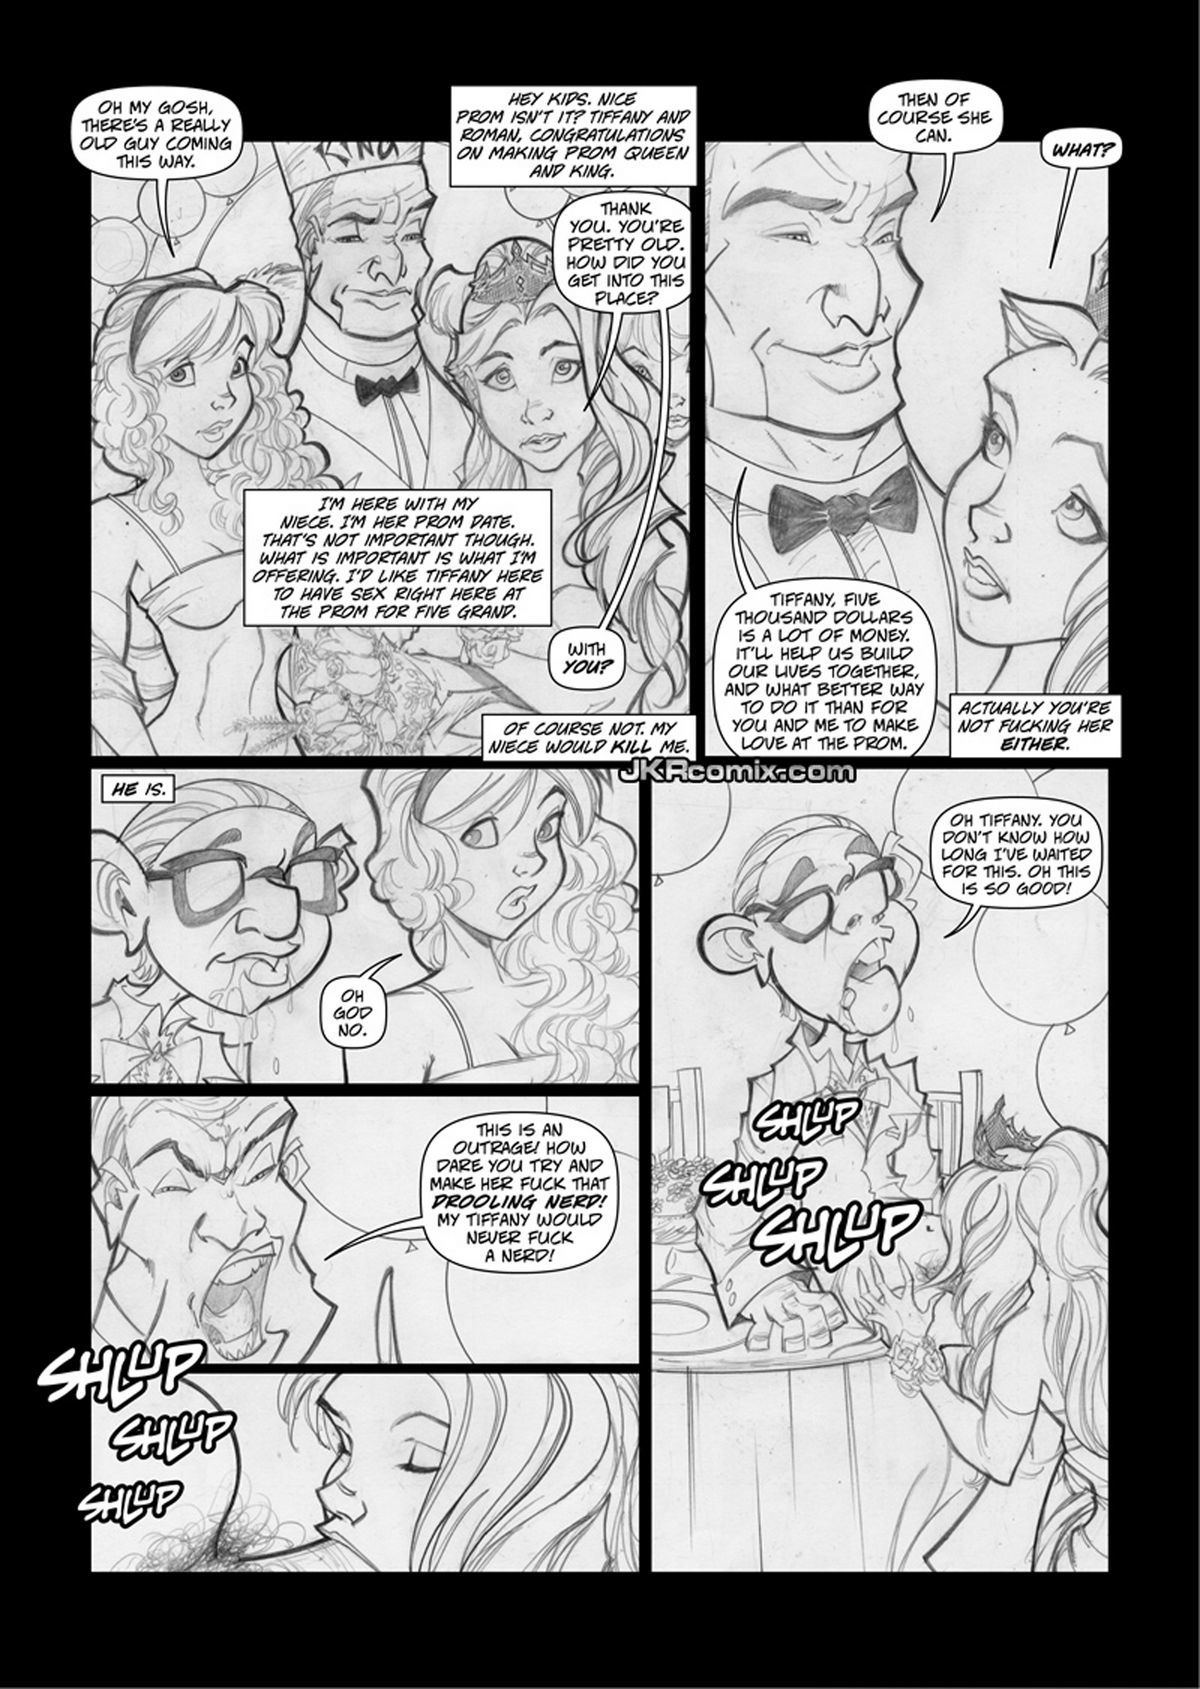 JKR Adult Comix-The Moneymaker 6 page 2